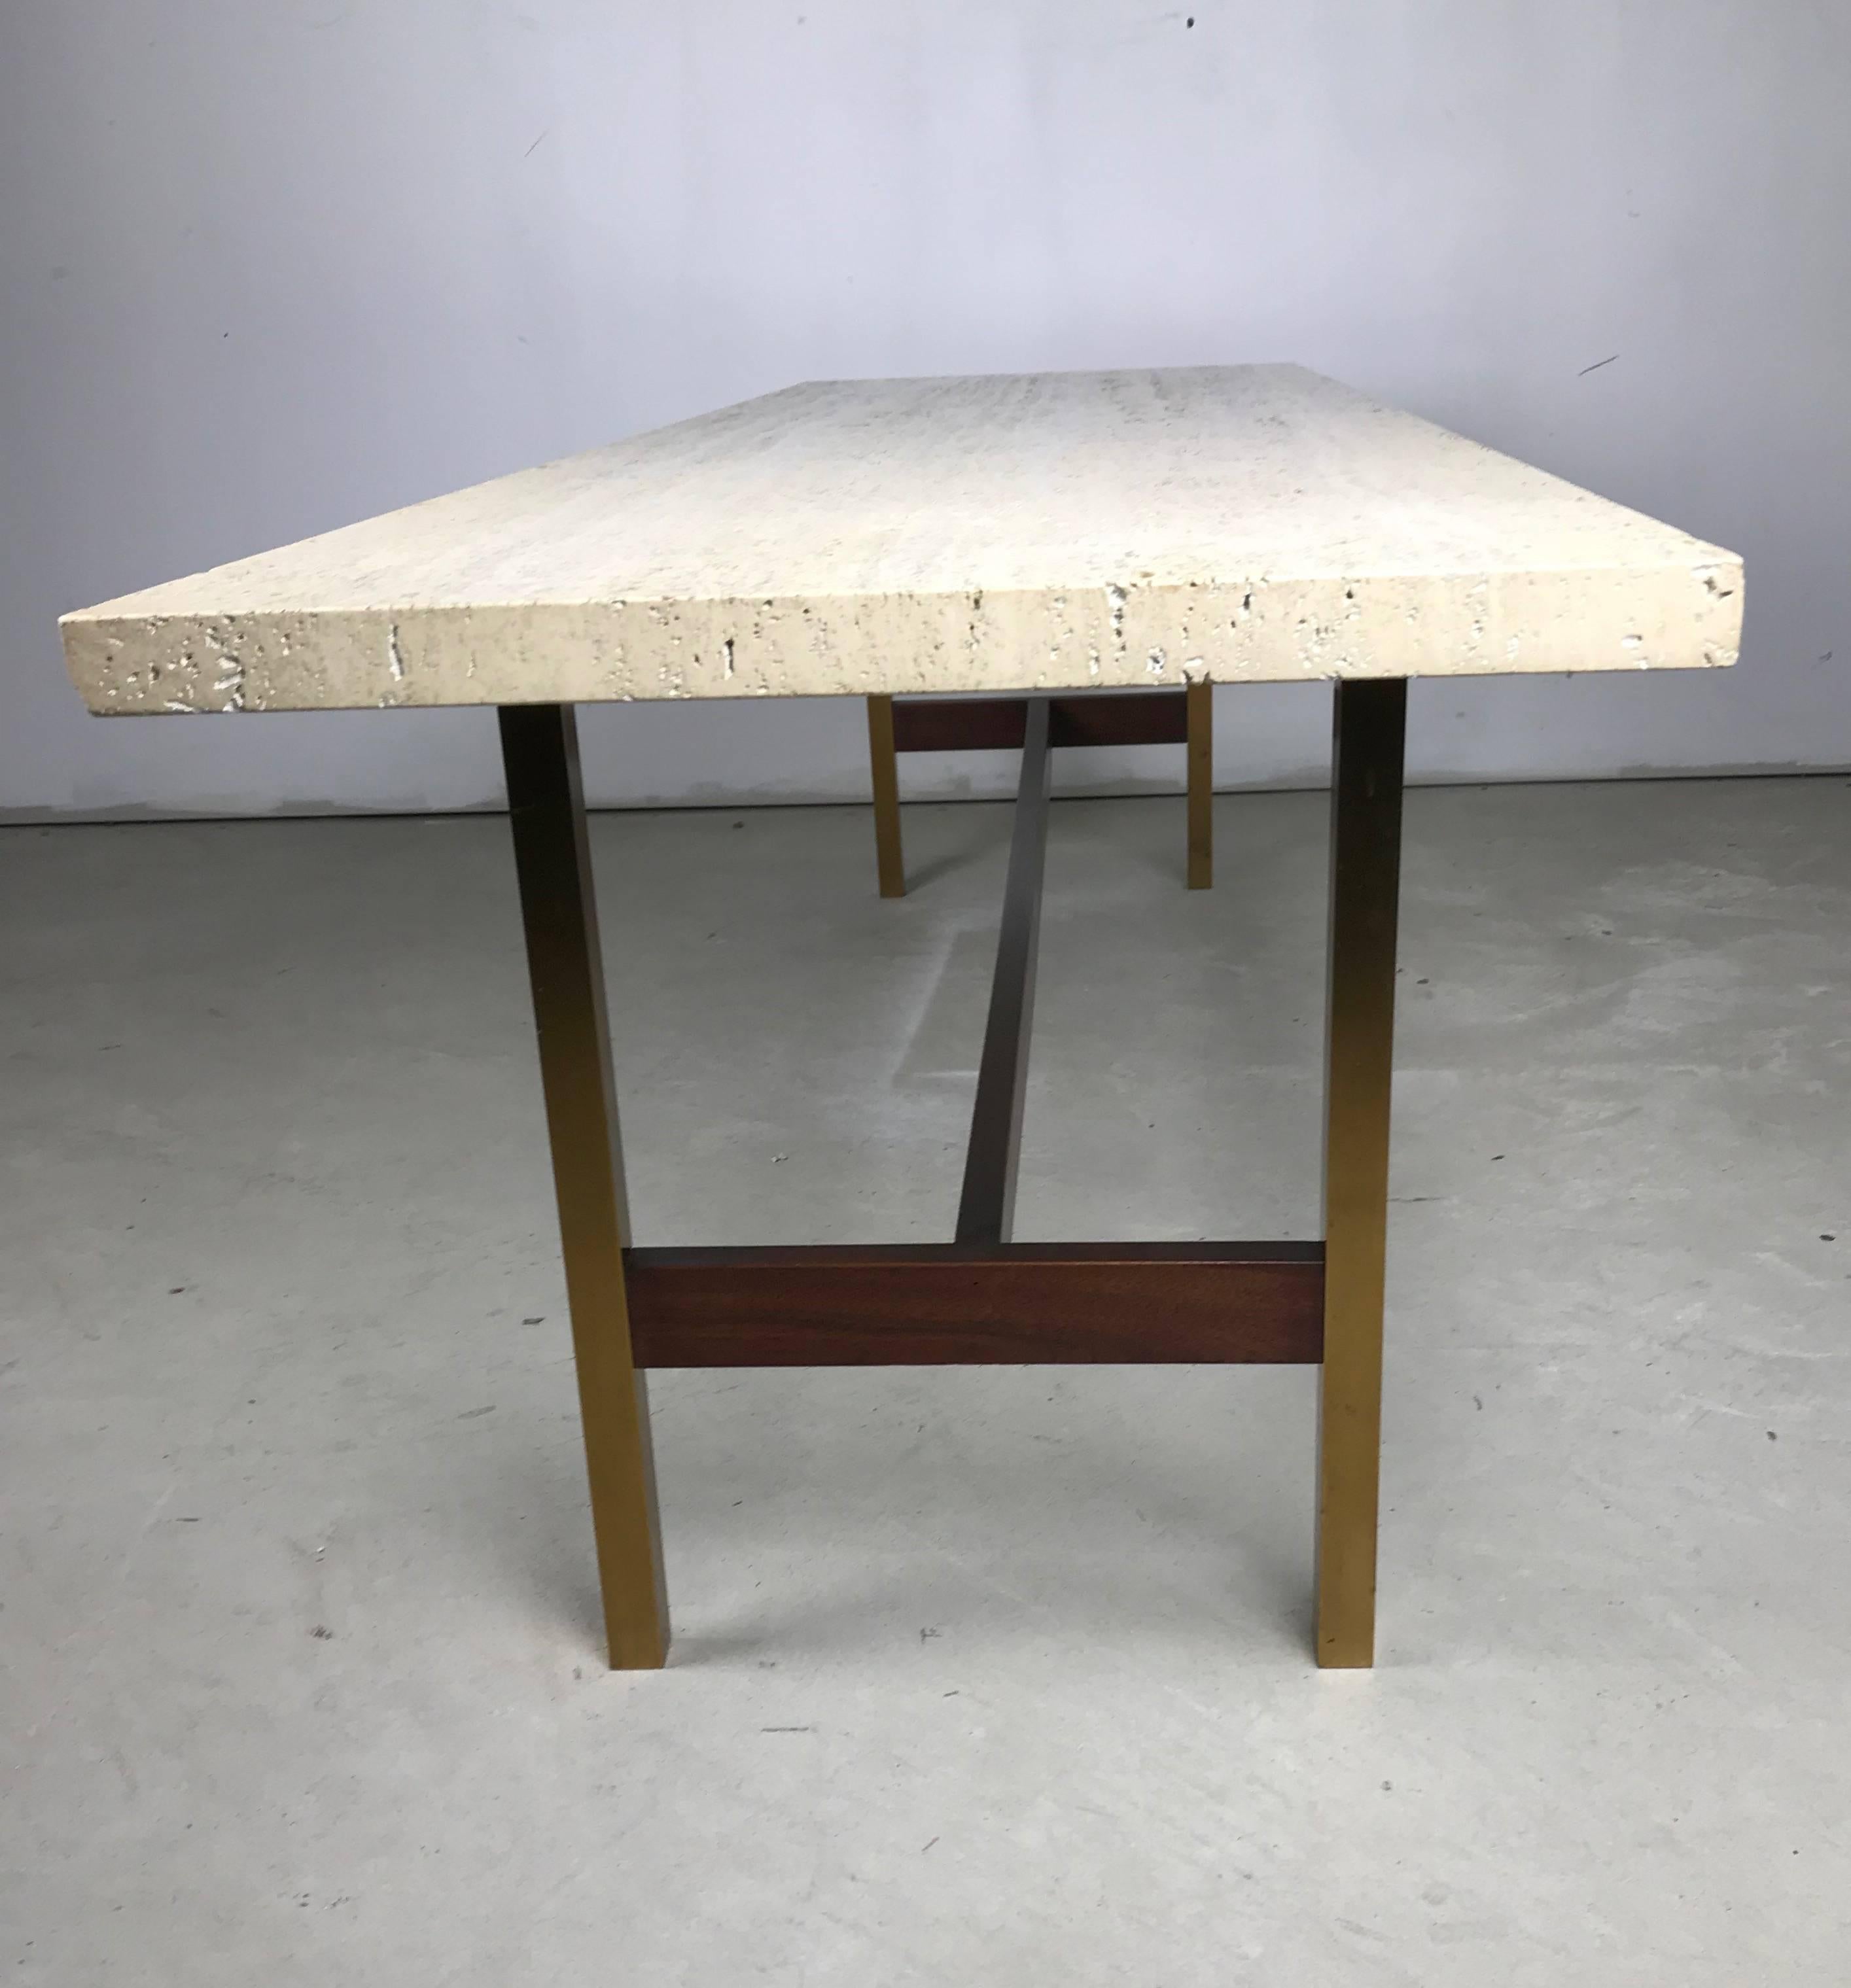 Unique Travertine Walnut and Brass Cocktail Table Designed by Phillip Enfield In Good Condition For Sale In Asbury Park, NJ